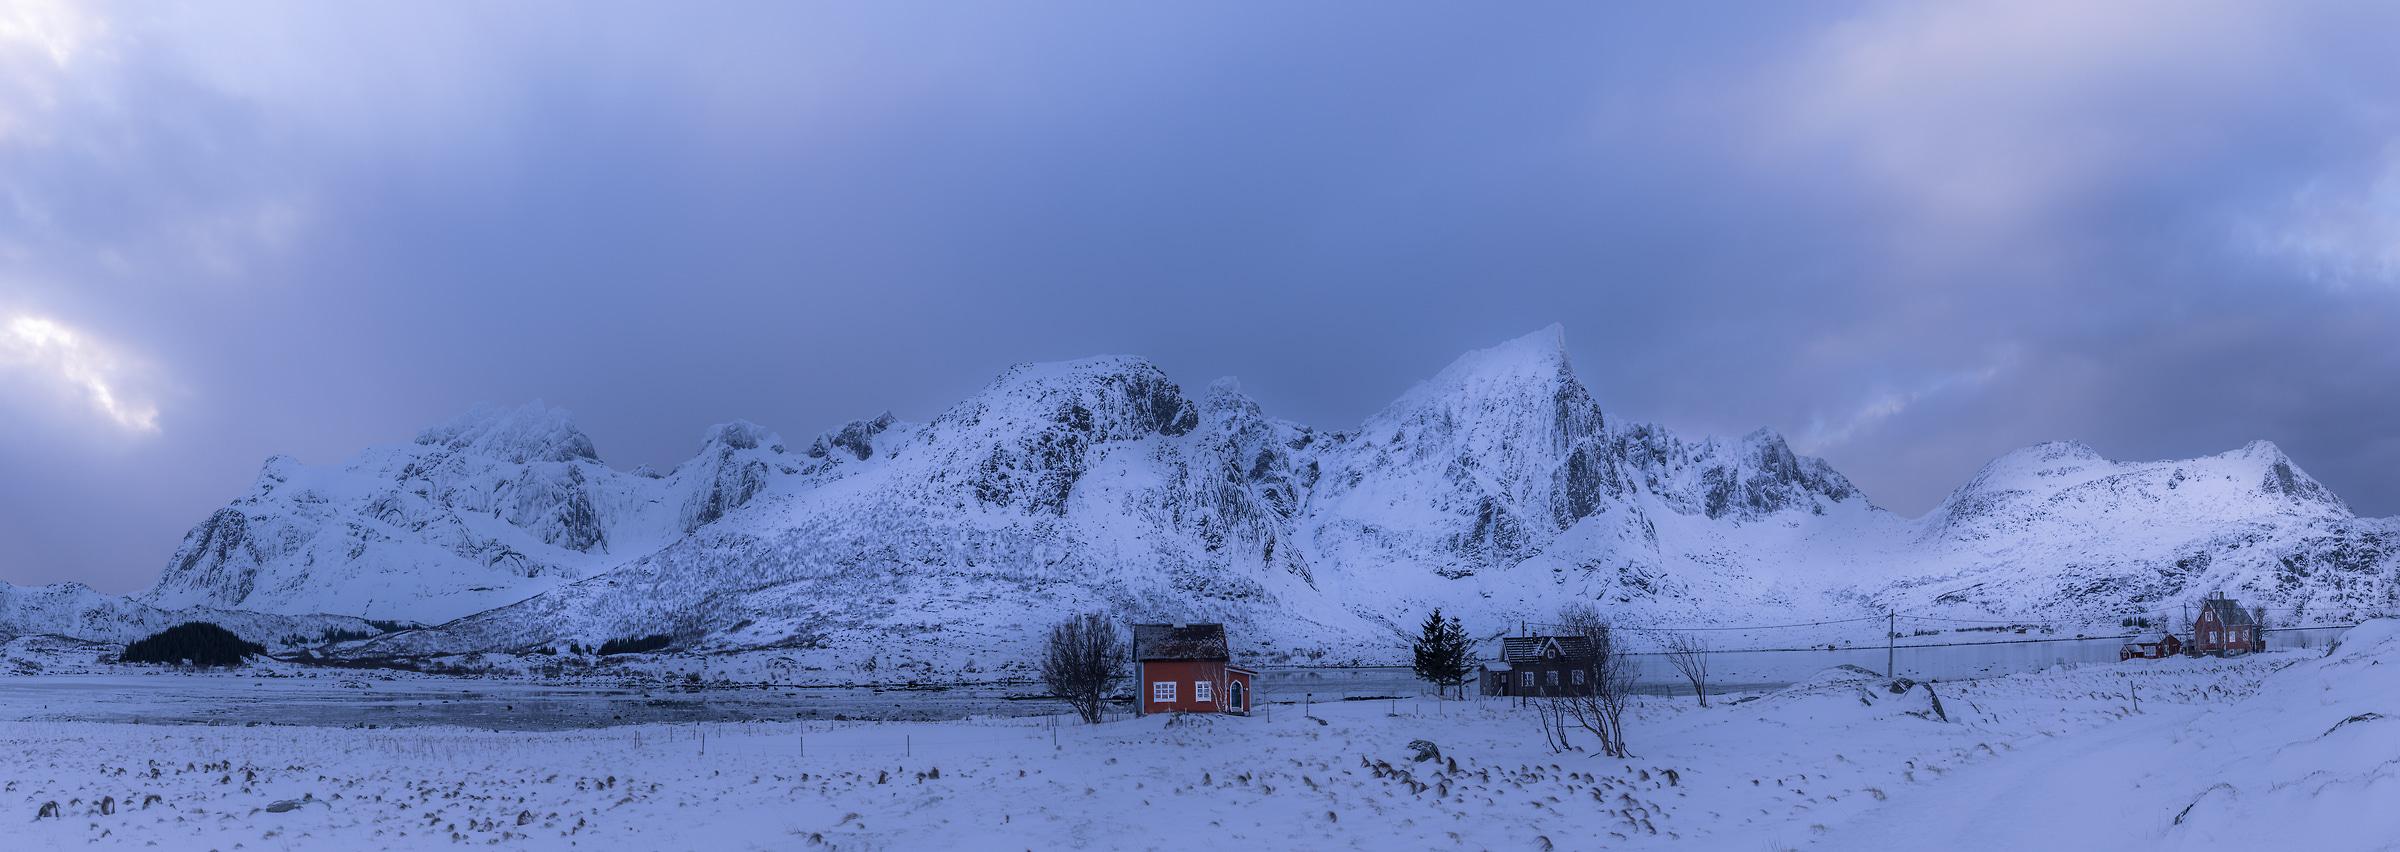 129 megapixels! A very high resolution, large-format VAST photo print of a landscape with mountains and a red house; landscape photograph created by Alfred Feil in Napp, Flakstad, Lofoten, Norway